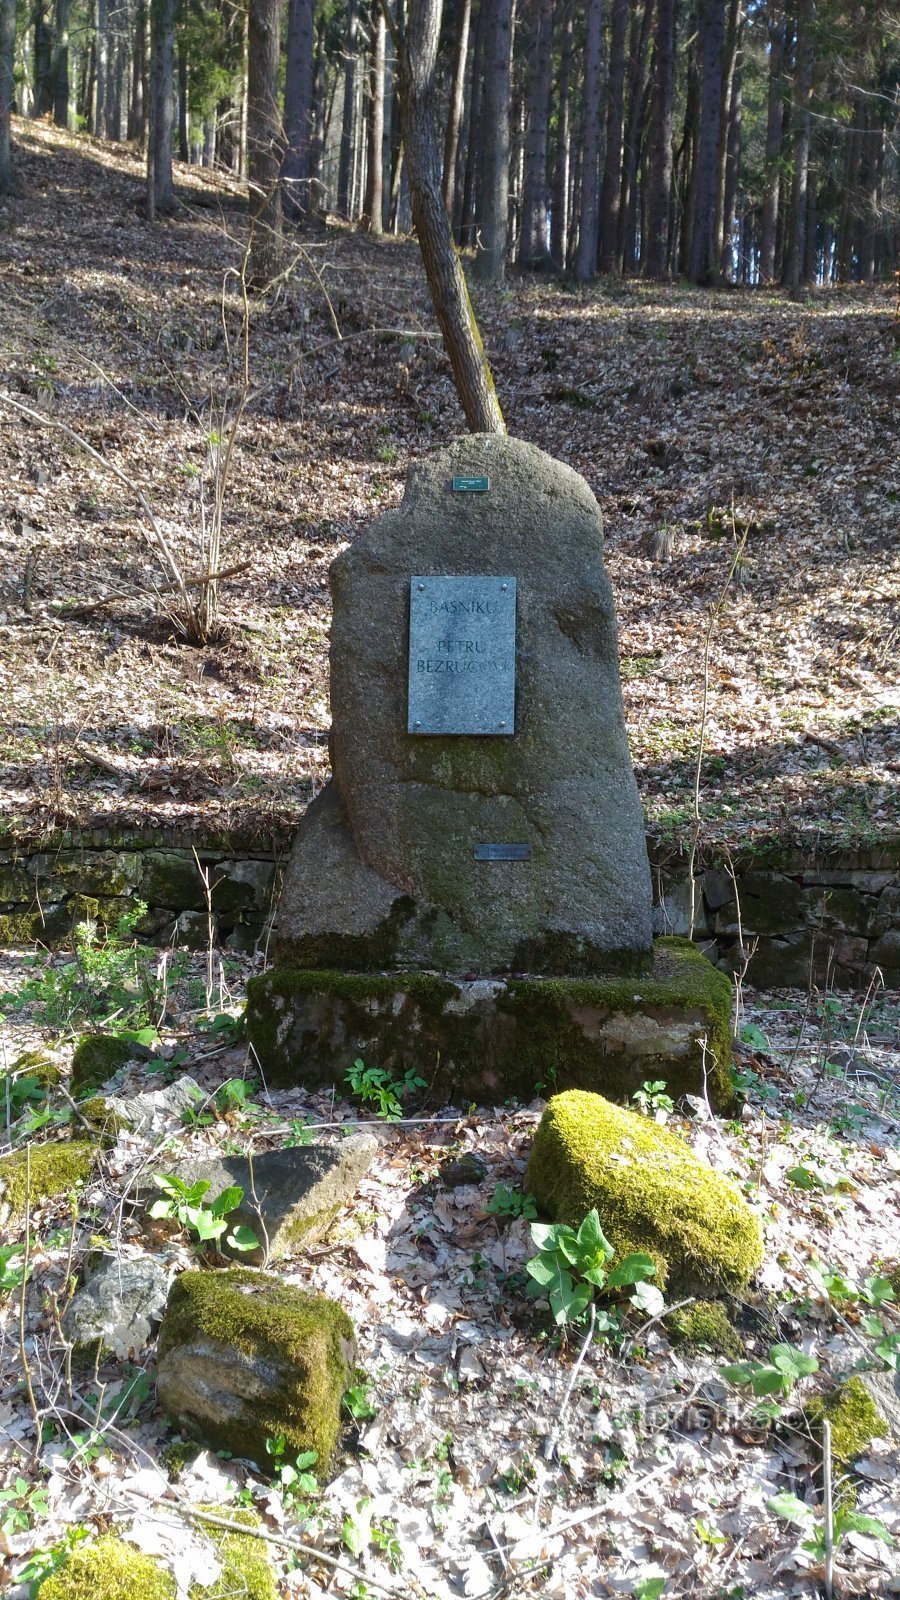 Monument to Petr Bezruč in the Ore Mountains.